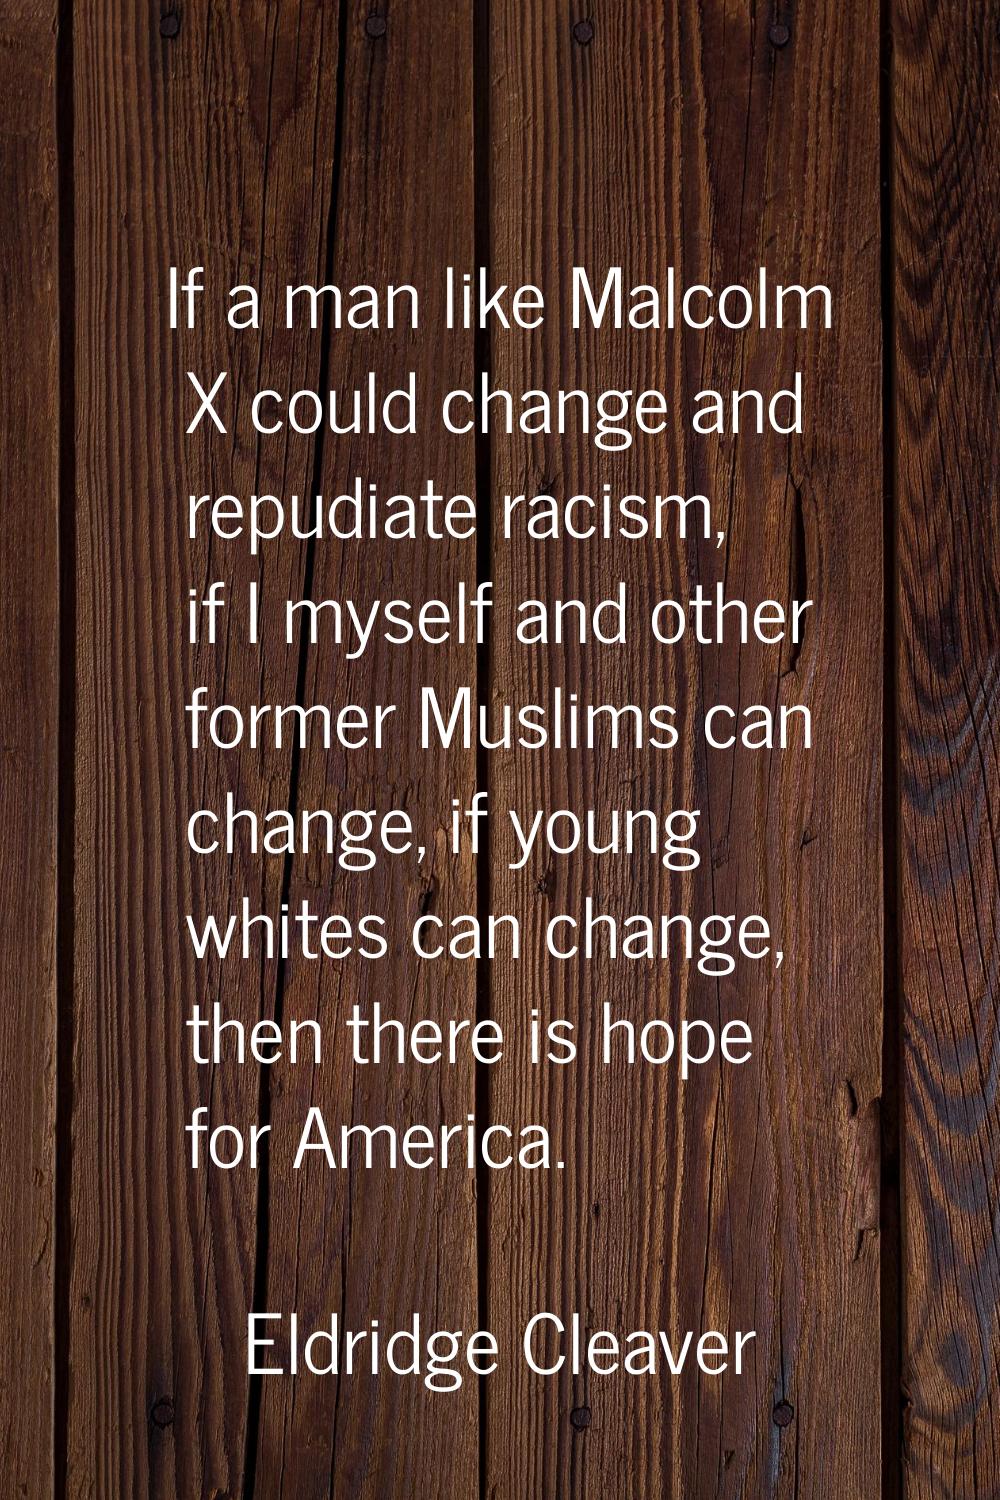 If a man like Malcolm X could change and repudiate racism, if I myself and other former Muslims can